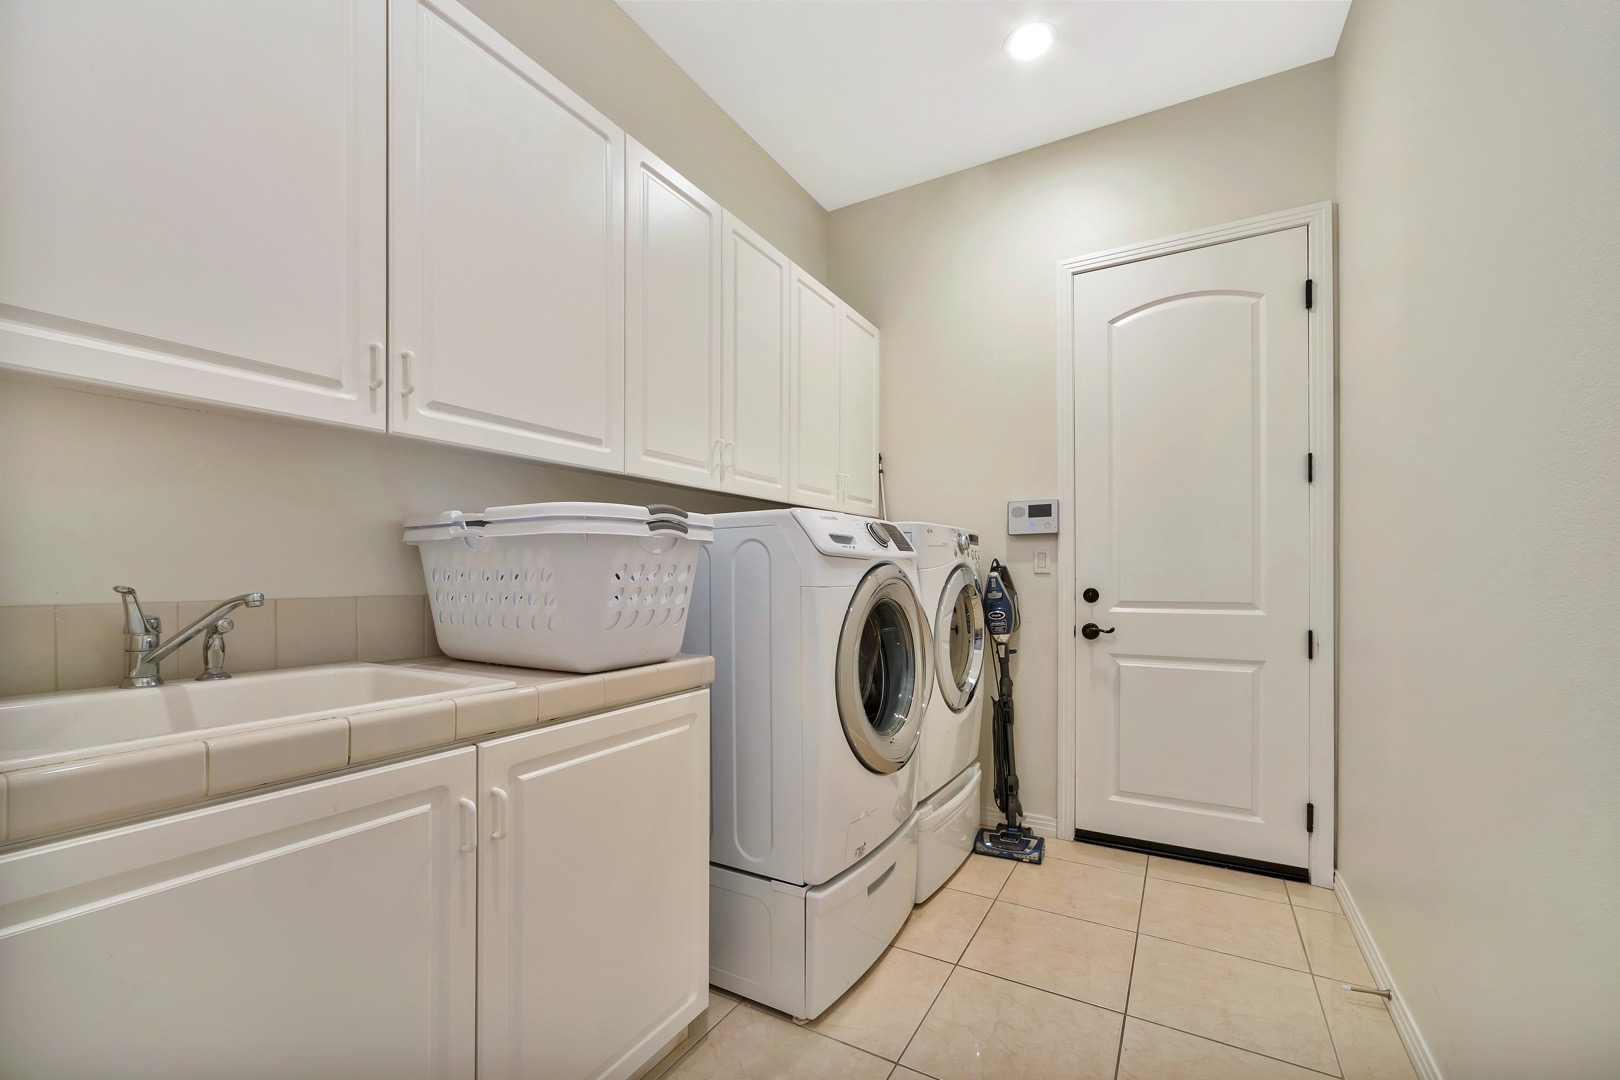 Newer washer & dryer so you can go back home with clean clothes :)